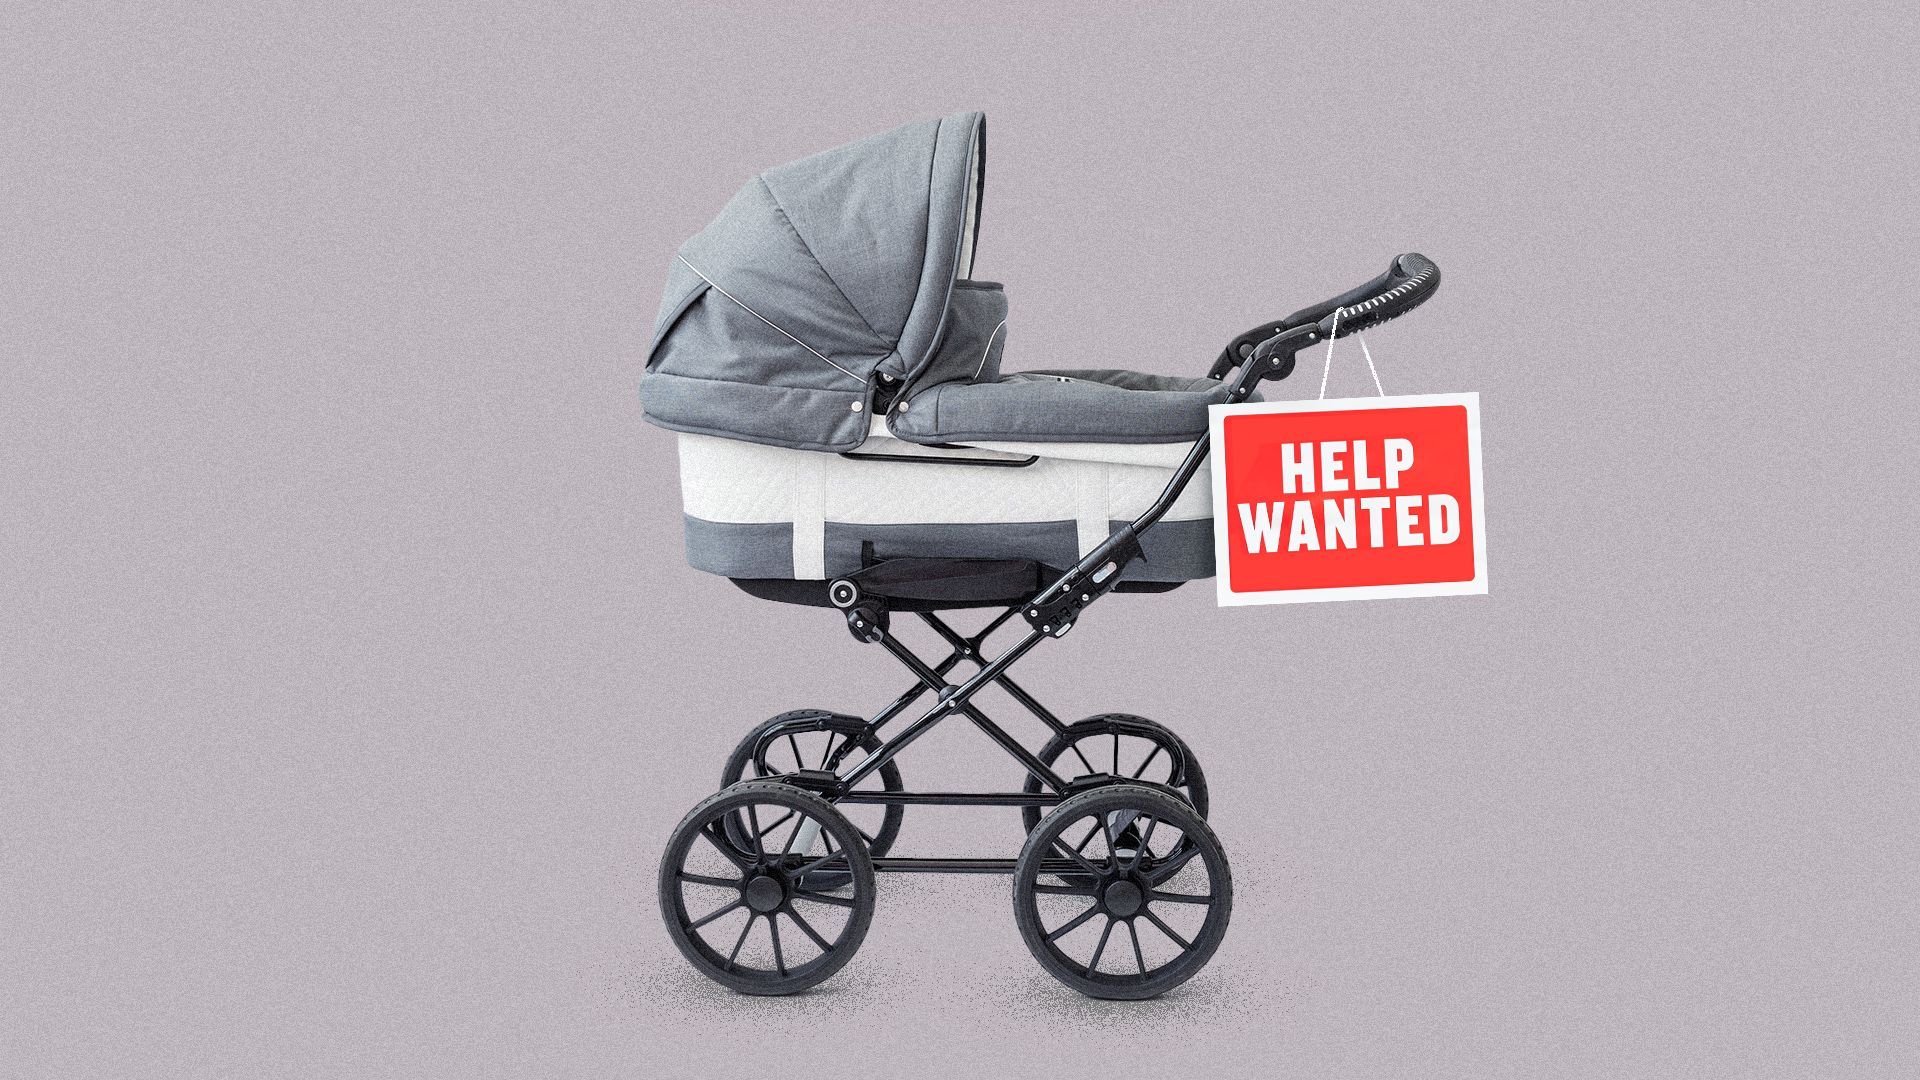 Illustration of a stroller with a "help wanted" sign hanging from the push handle. 